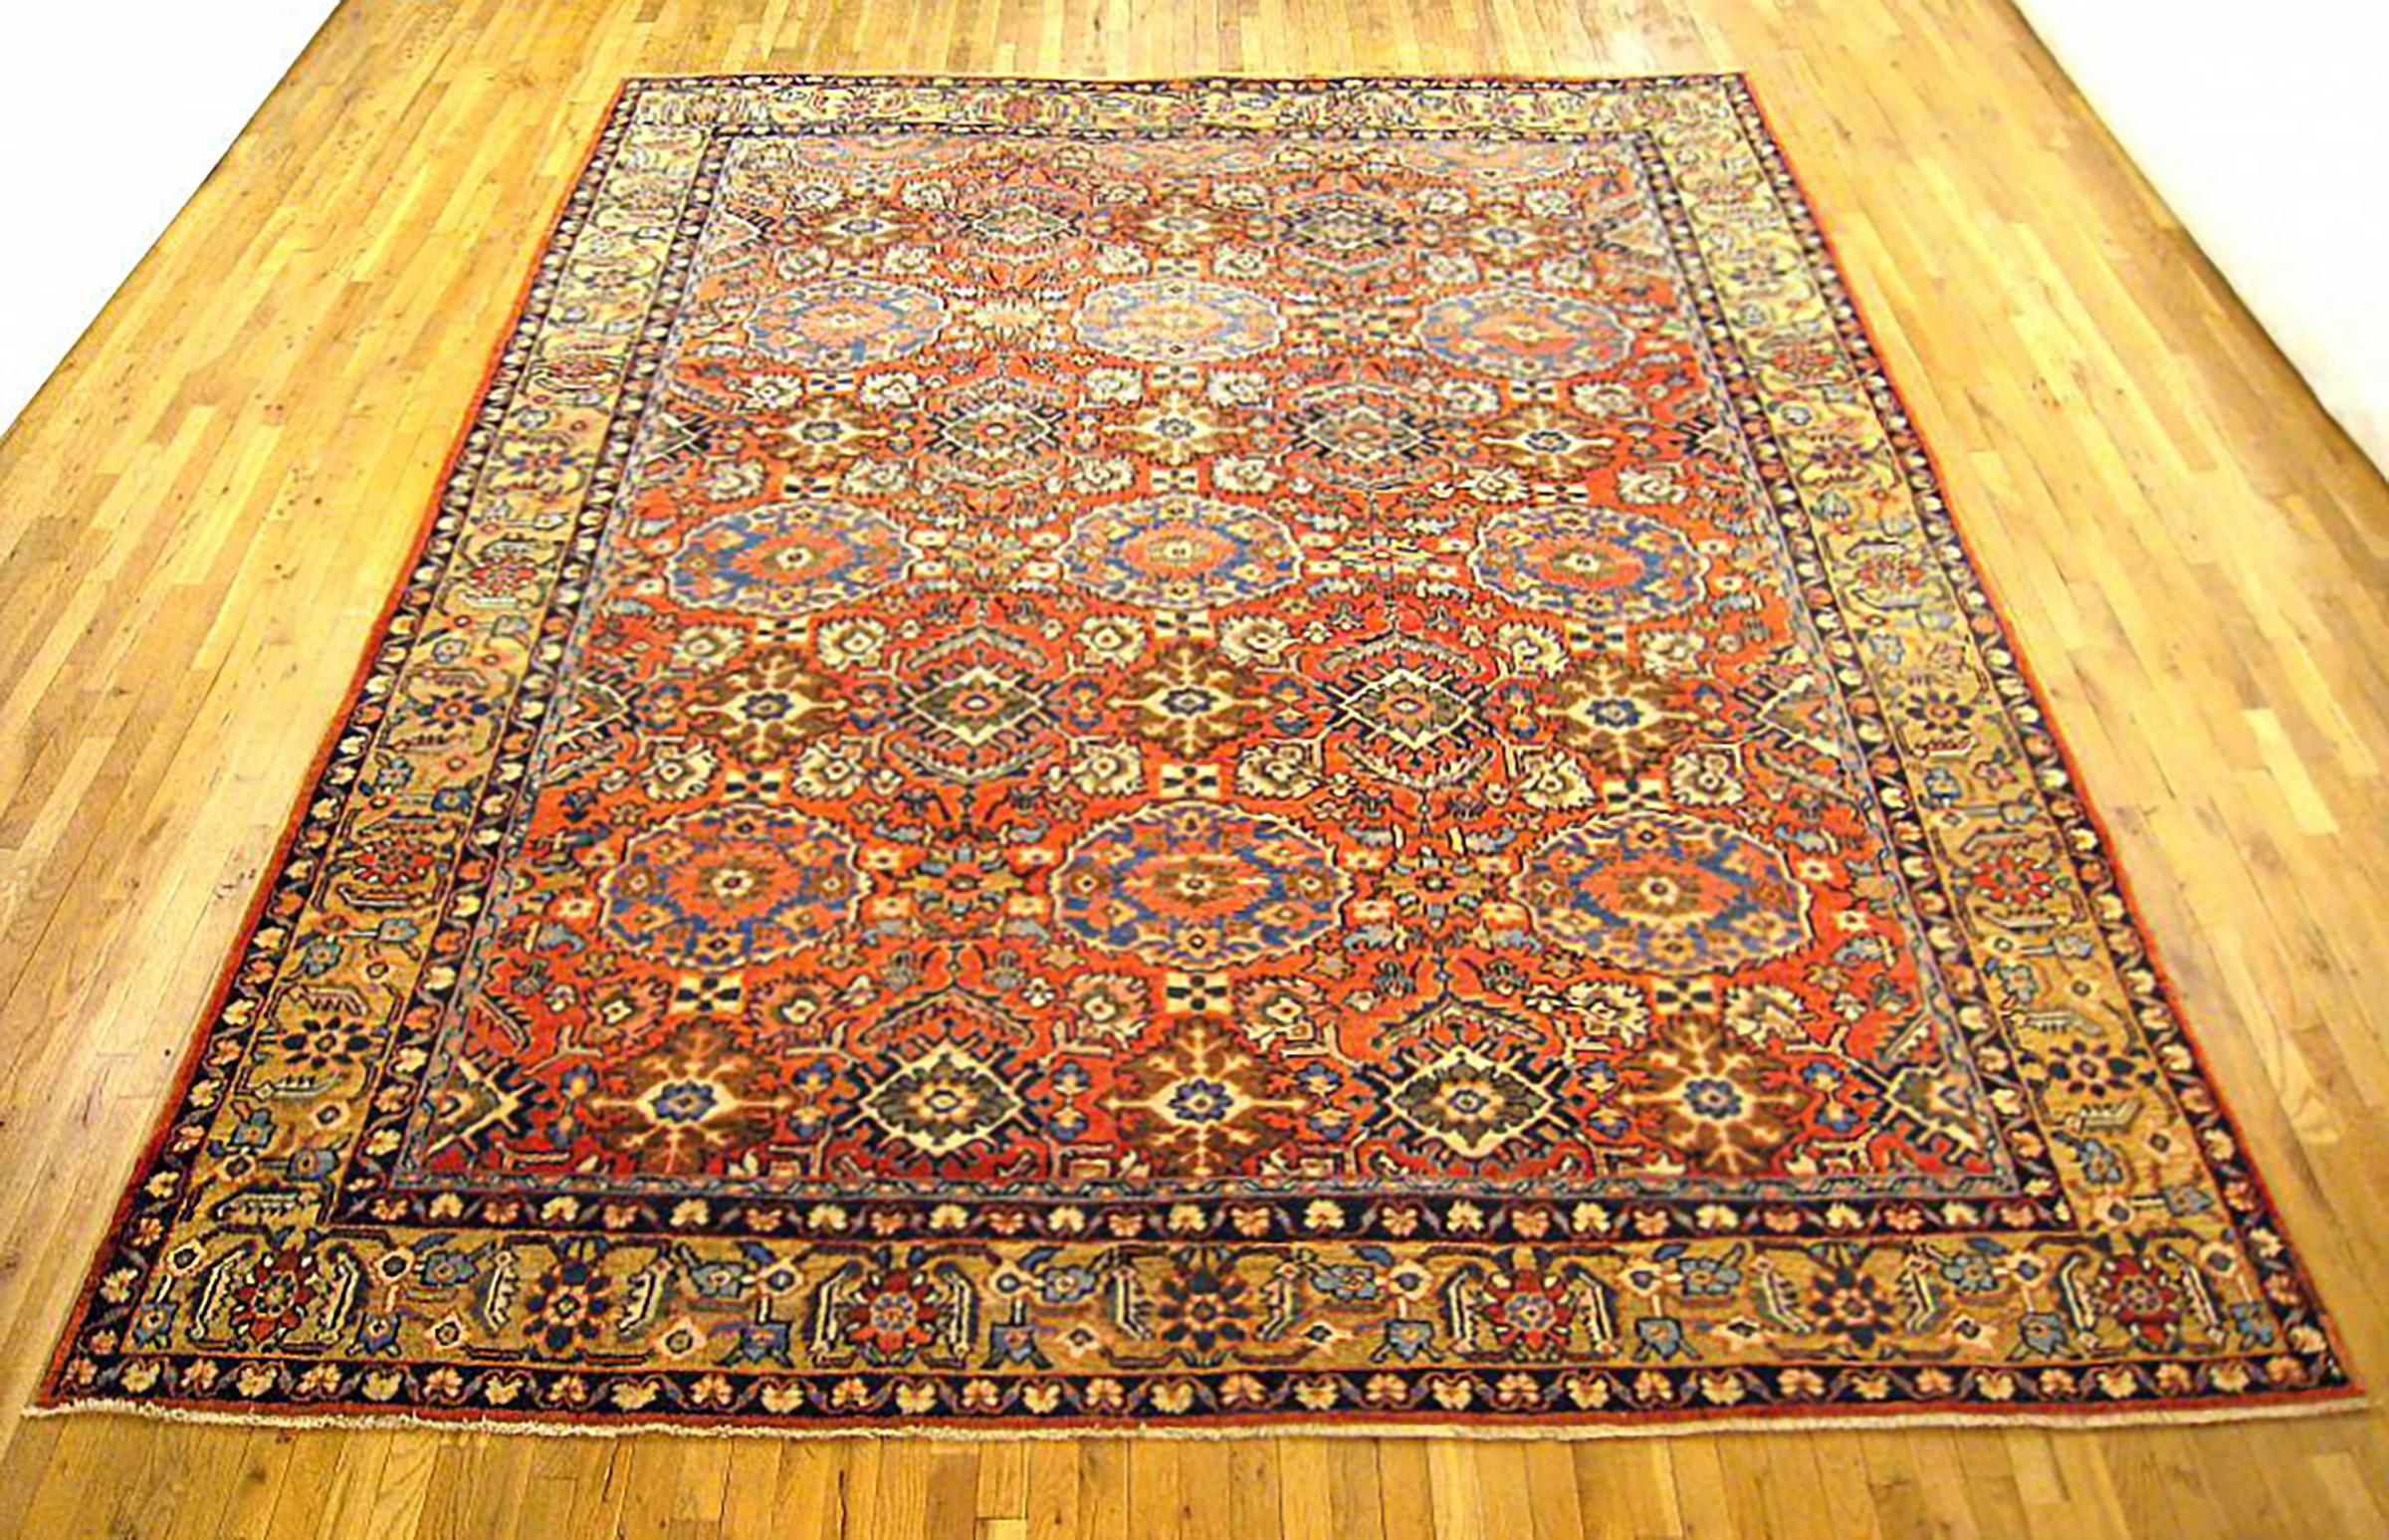 Antique Persian Sultanabad rug, room size, circa 1900.

A one-of-a-kind antique Persian Sultanabad oriental carpet with a thick and lustrous wool pile, knotted by hand, with soft touch and great resistance to wear. This carpet features palmettes